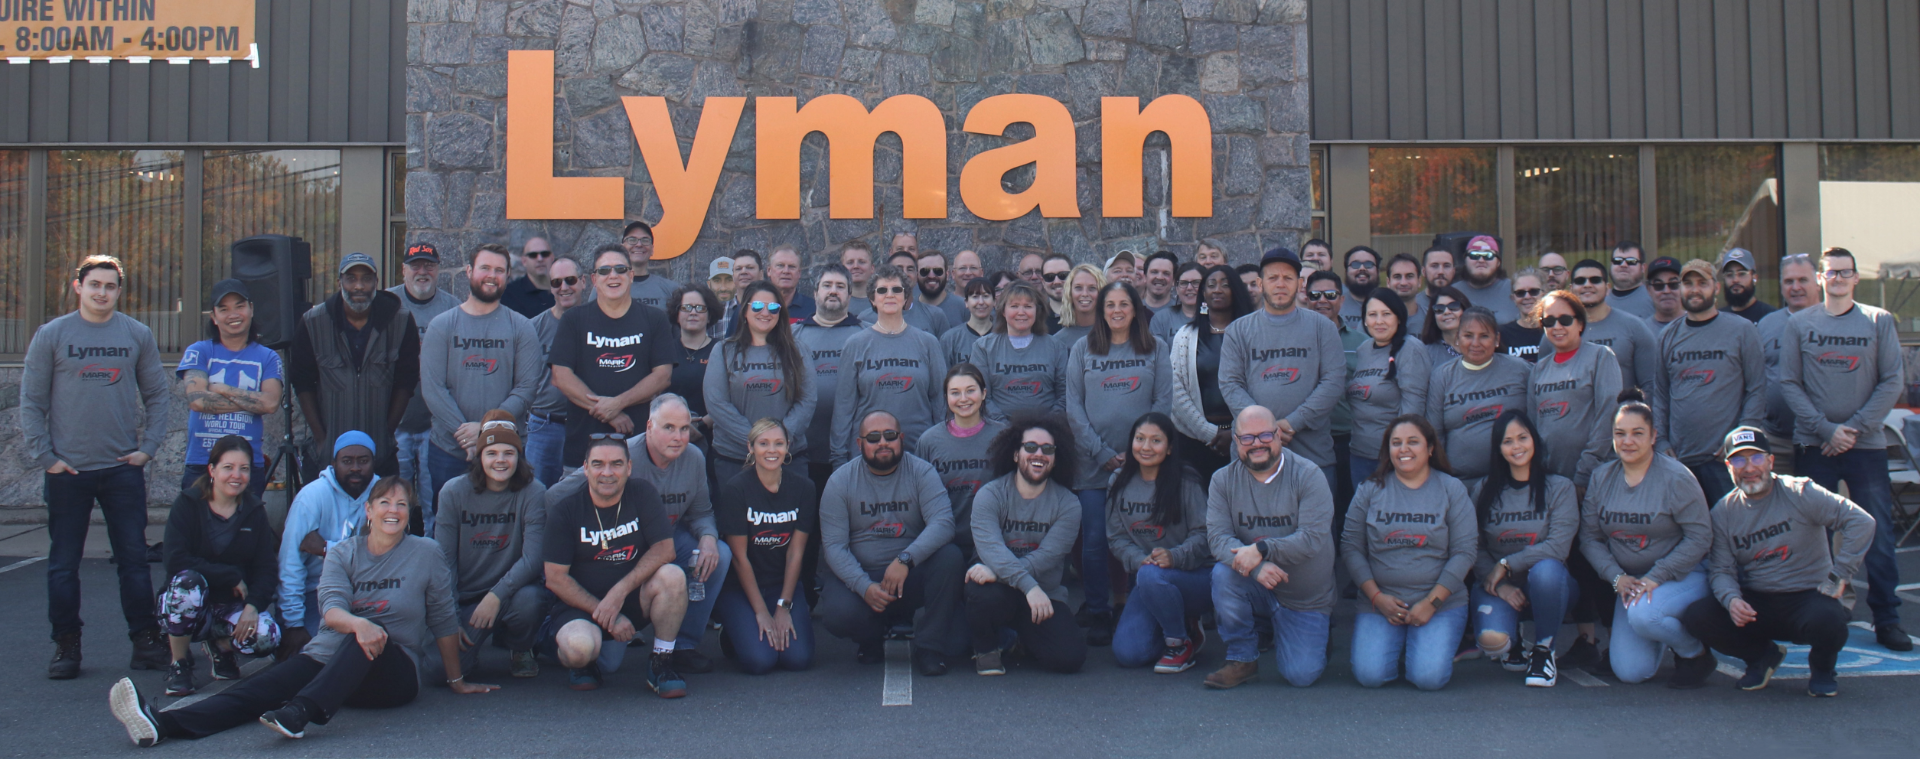 Our Lyman Family